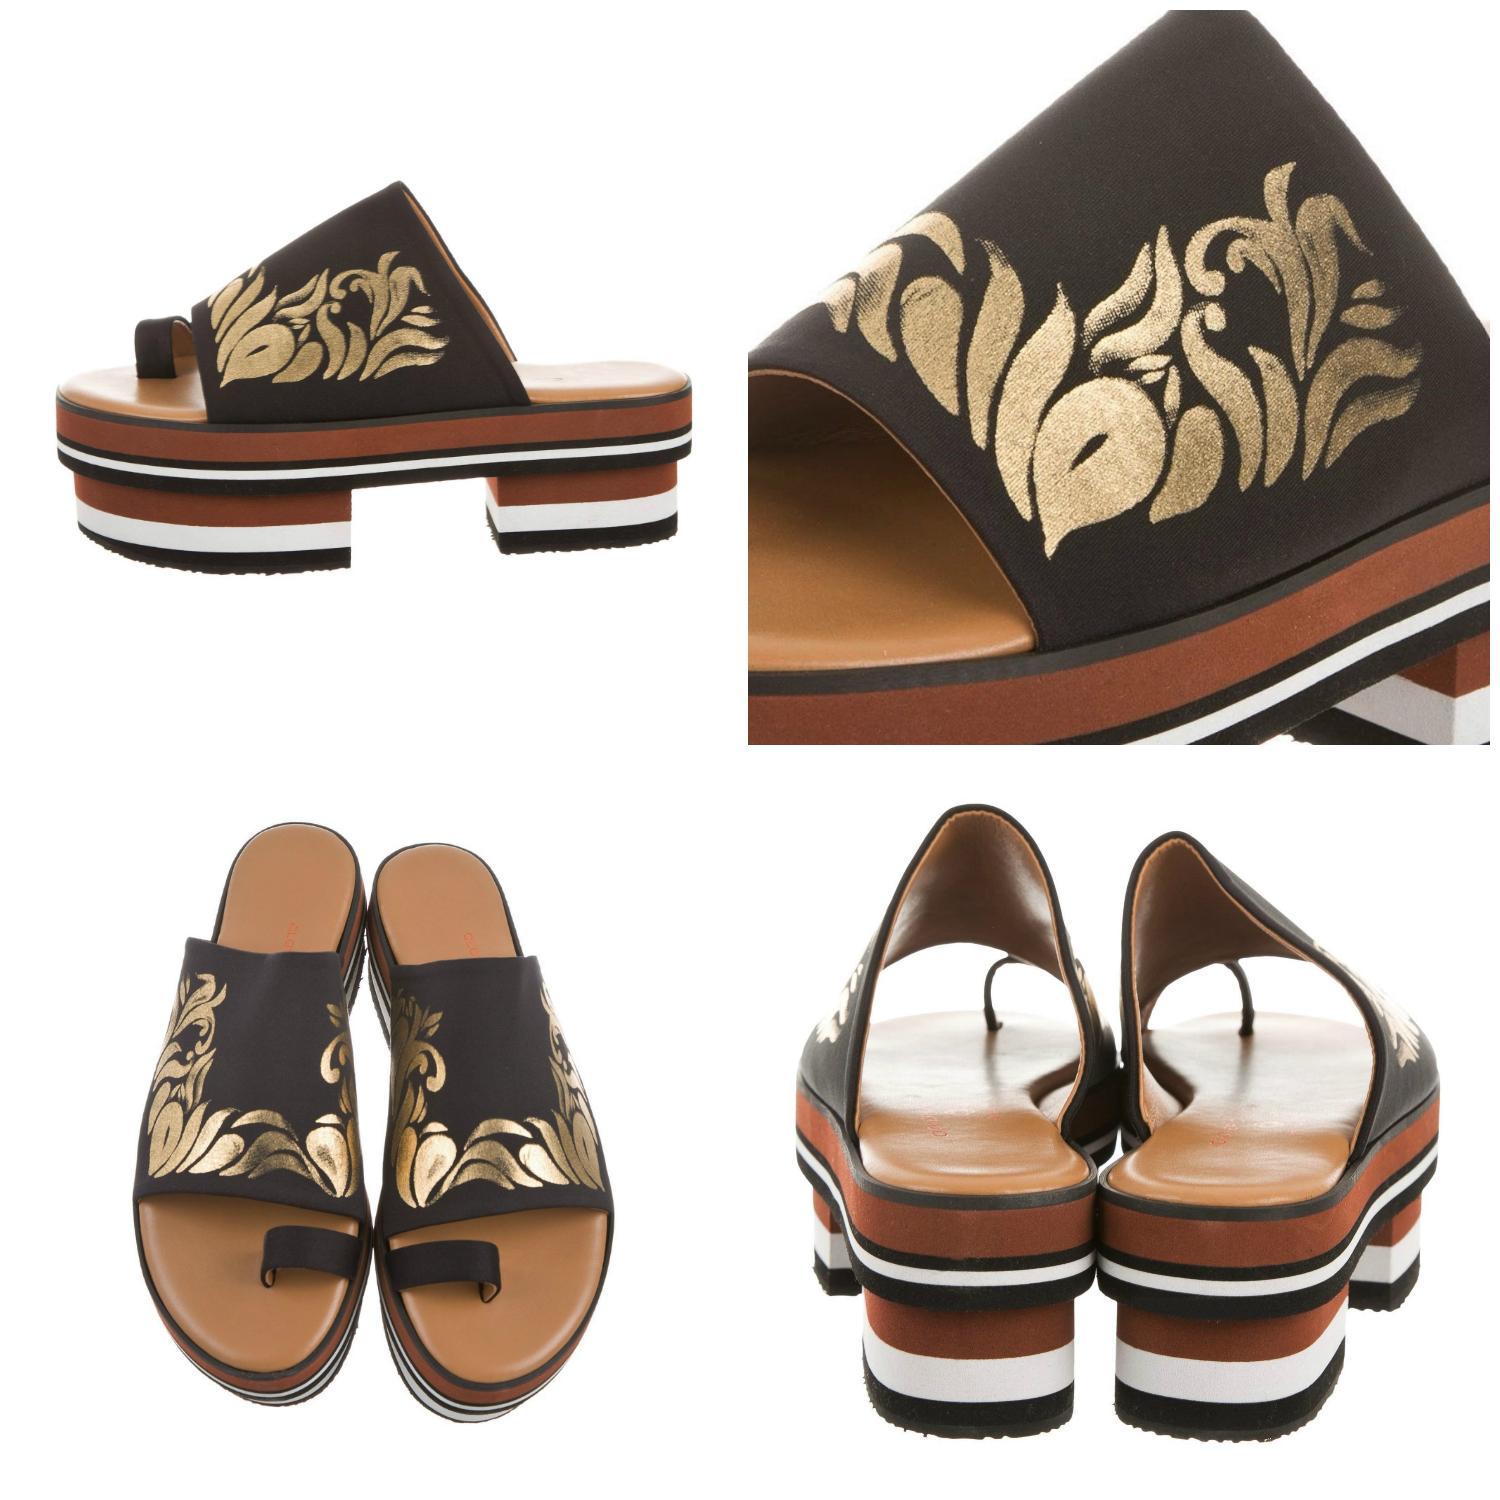 Clover Canyon Geta Sandal
Brand New
* Stunning Japanese Style Platform
* Gold Design 
* Size: 7
* Rubber Soles
* Toe Strap
* Leather Insole
* 2.5